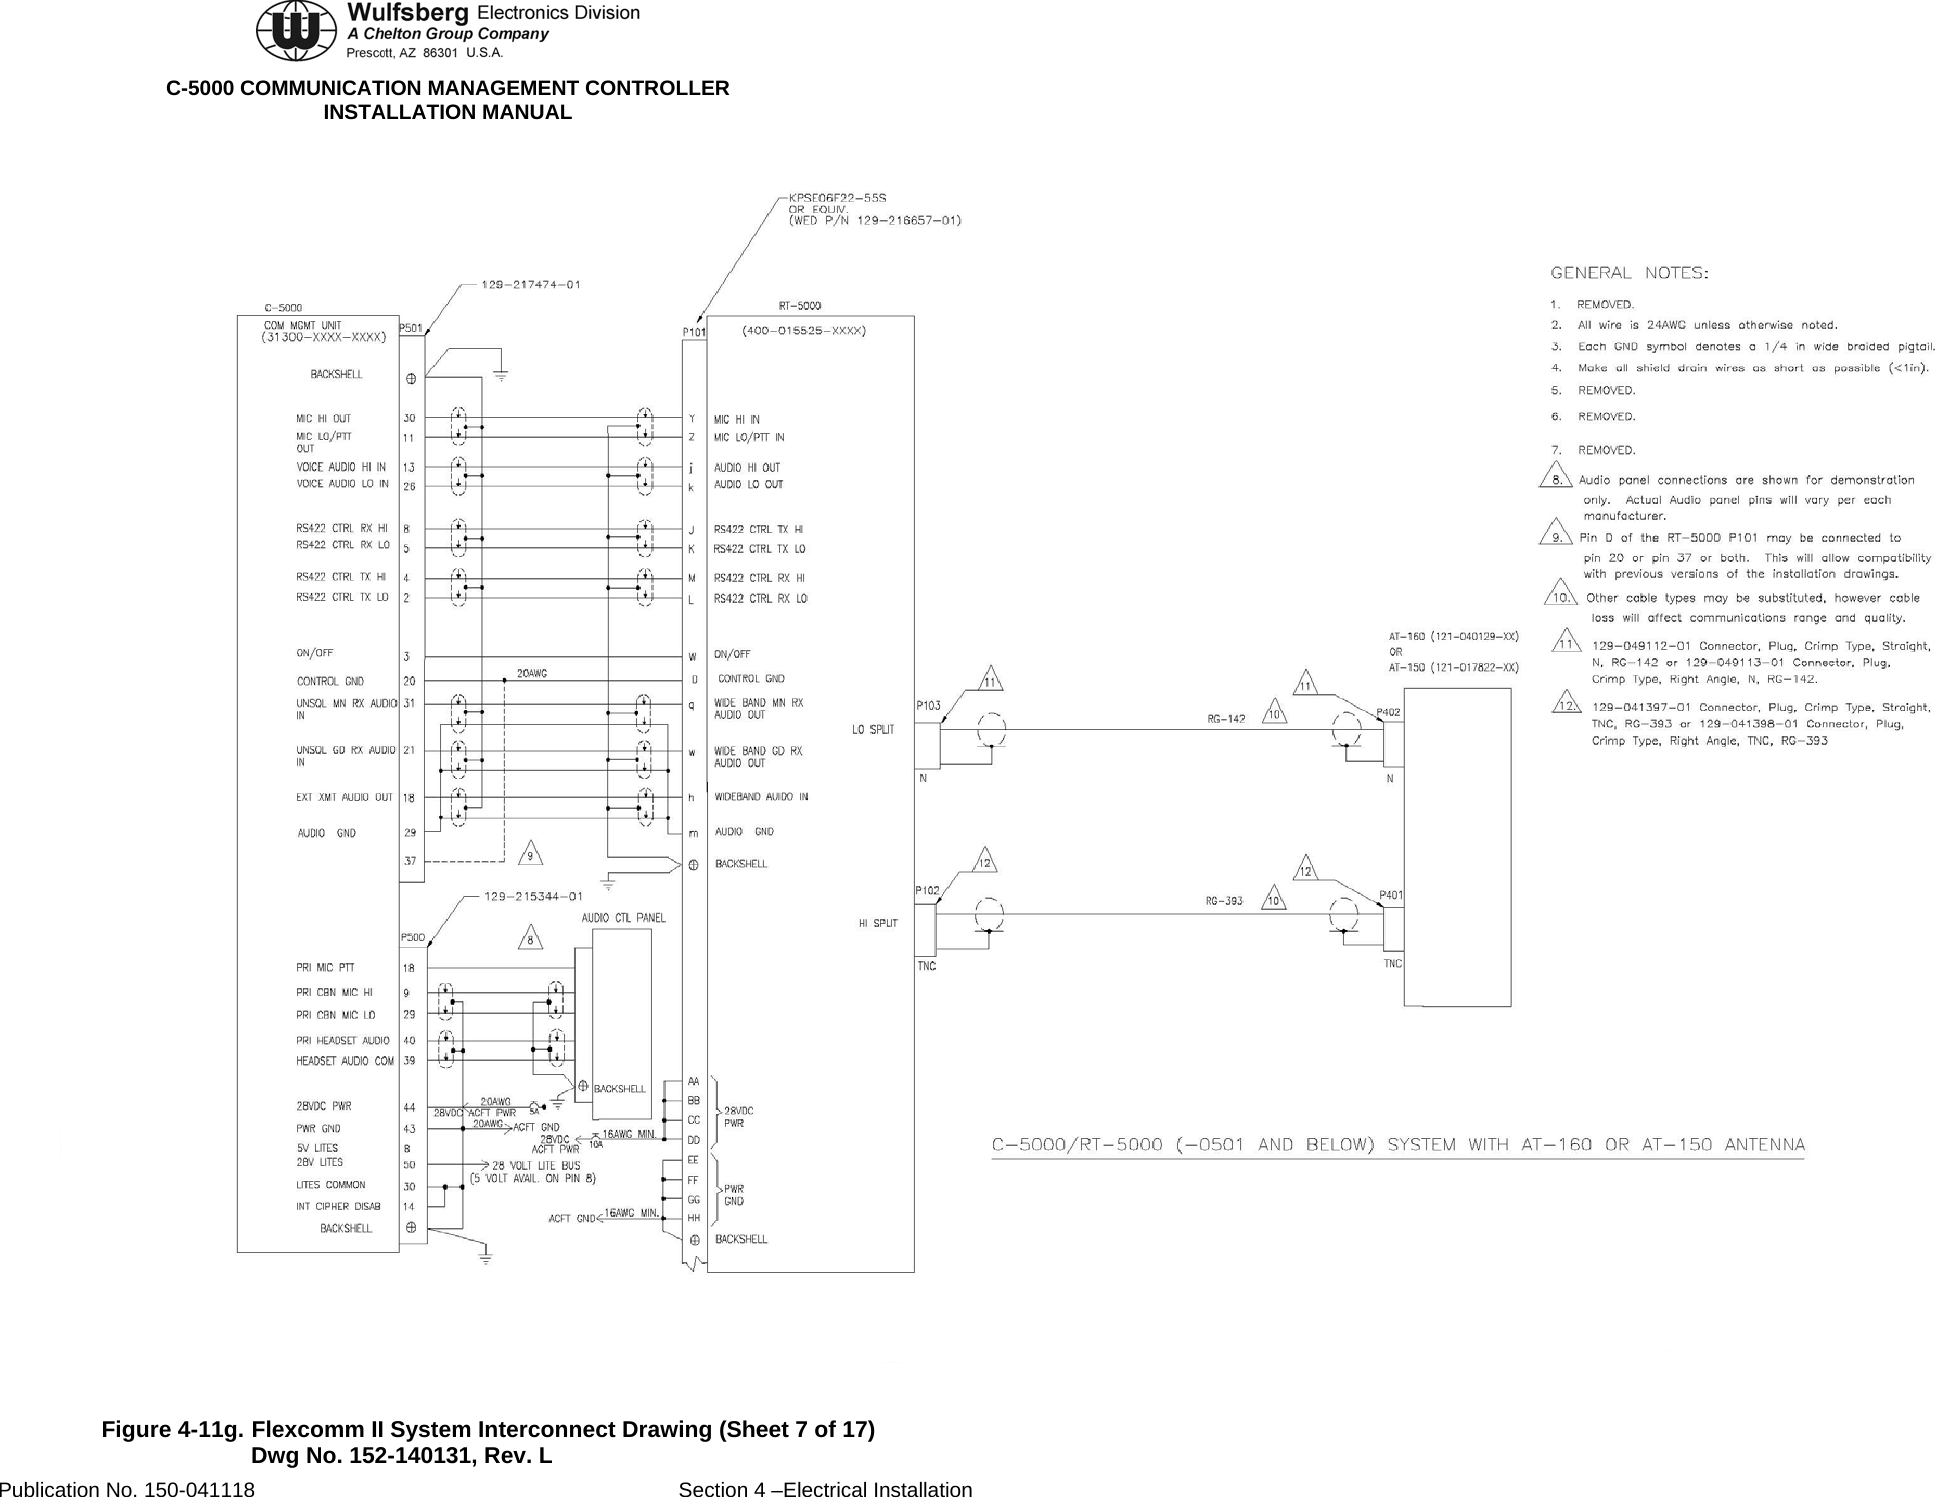  C-5000 COMMUNICATION MANAGEMENT CONTROLLER INSTALLATION MANUAL  Figure 4-11g. Flexcomm II System Interconnect Drawing (Sheet 7 of 17) Dwg No. 152-140131, Rev. L Publication No. 150-041118  Section 4 –Electrical Installation 